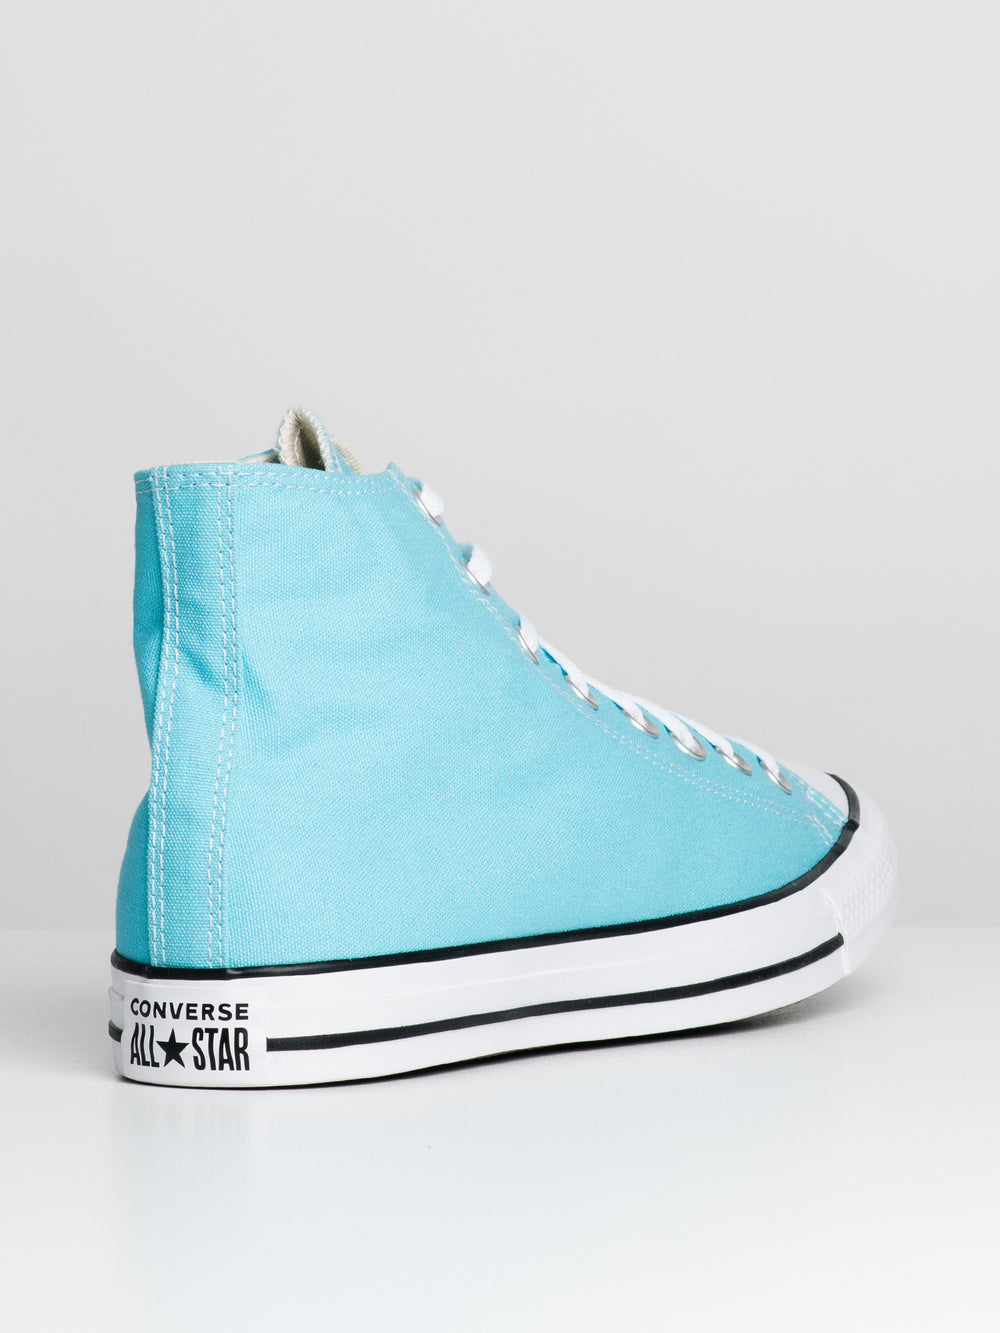 CONVERSE CHUCK TAYLOR ALL STAR HIGH TOP POUR HOMME - DÉSTOCKAGE